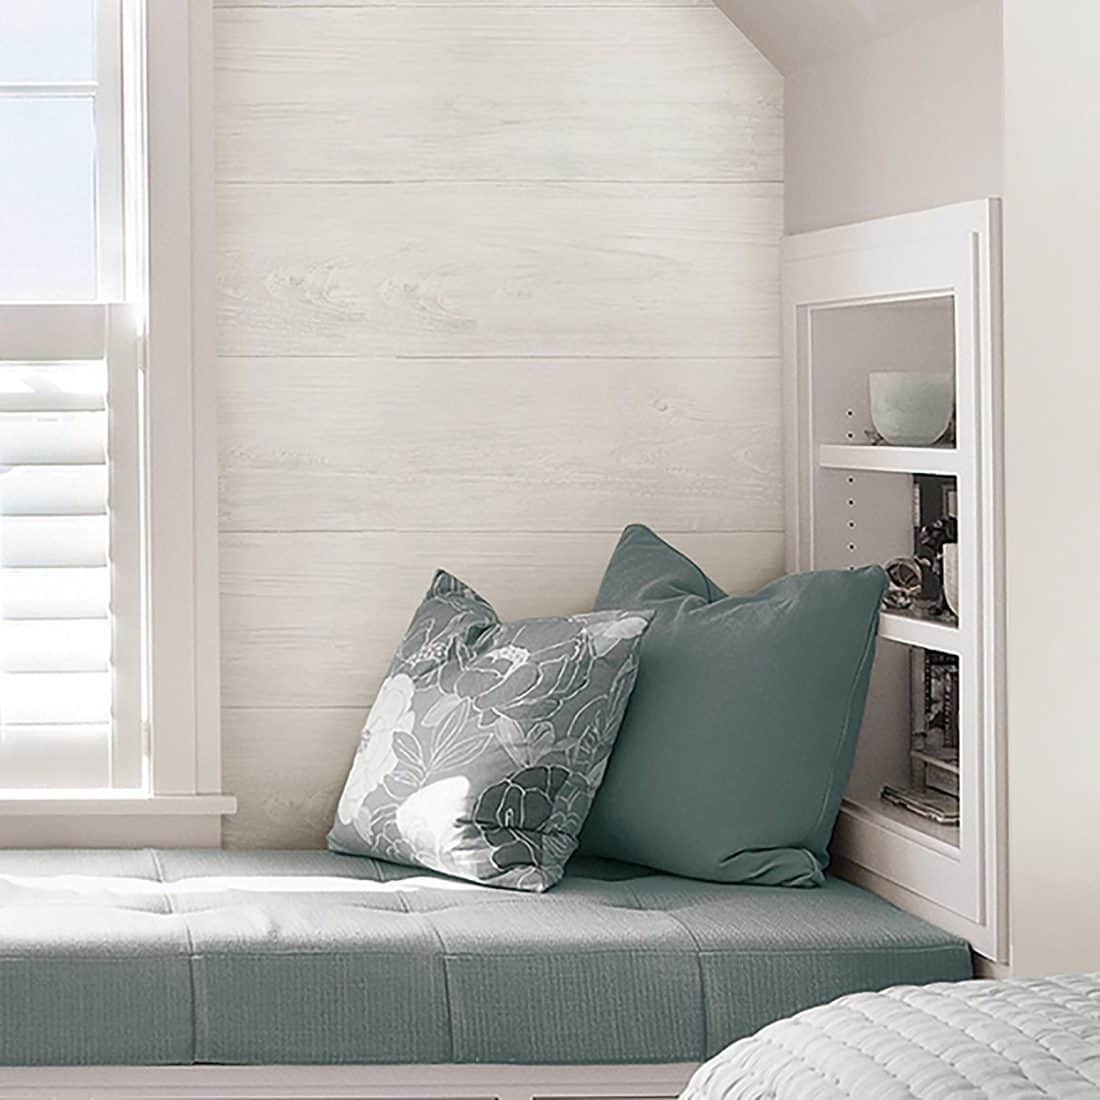 window seat with pillows, built-in wall shelf